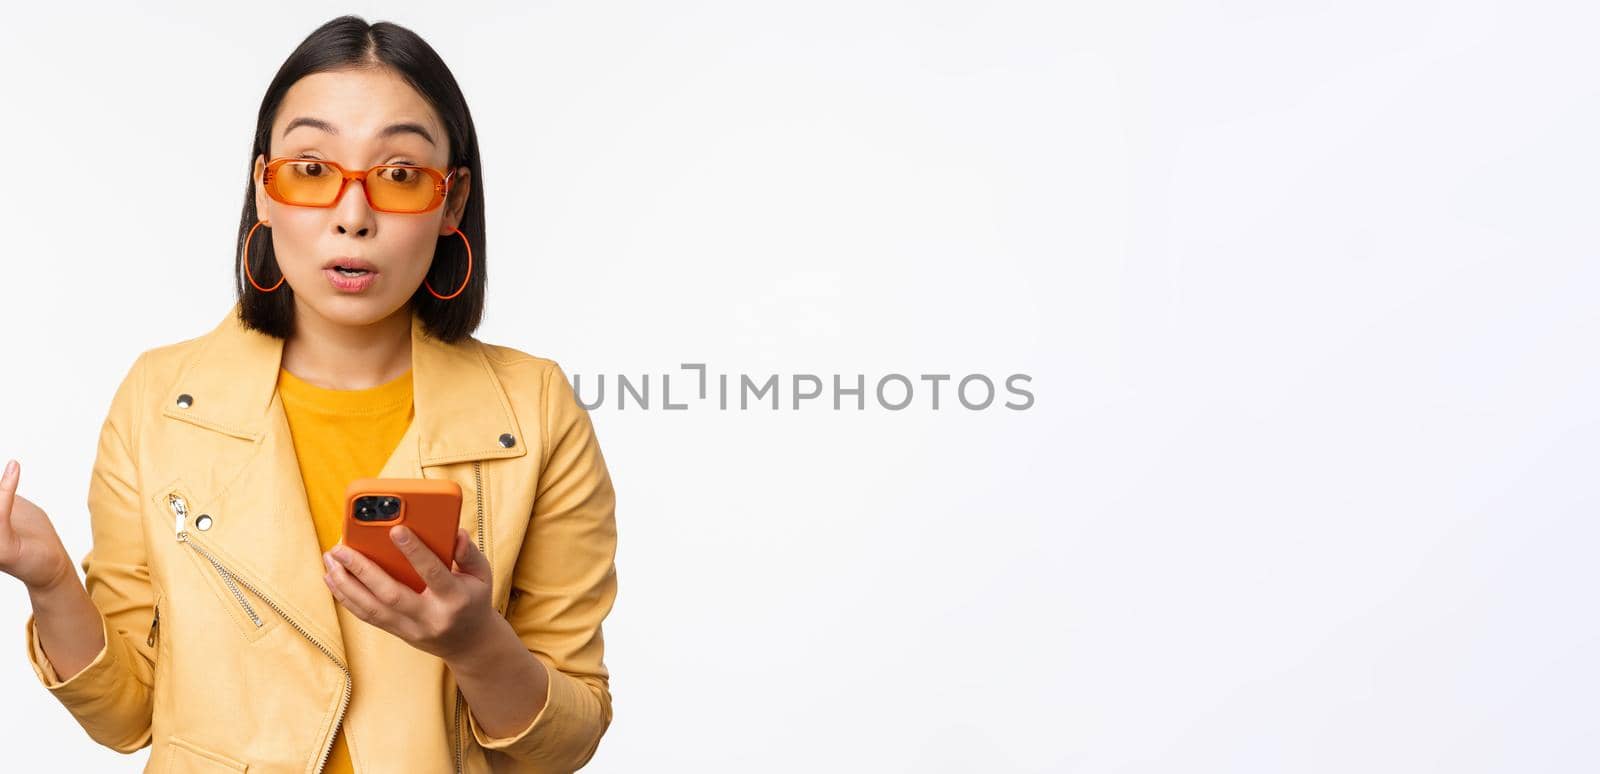 Portrait of korean girl in sunglasses, holding smartphone, looking confused and shrugging, standing over white background. Copy space